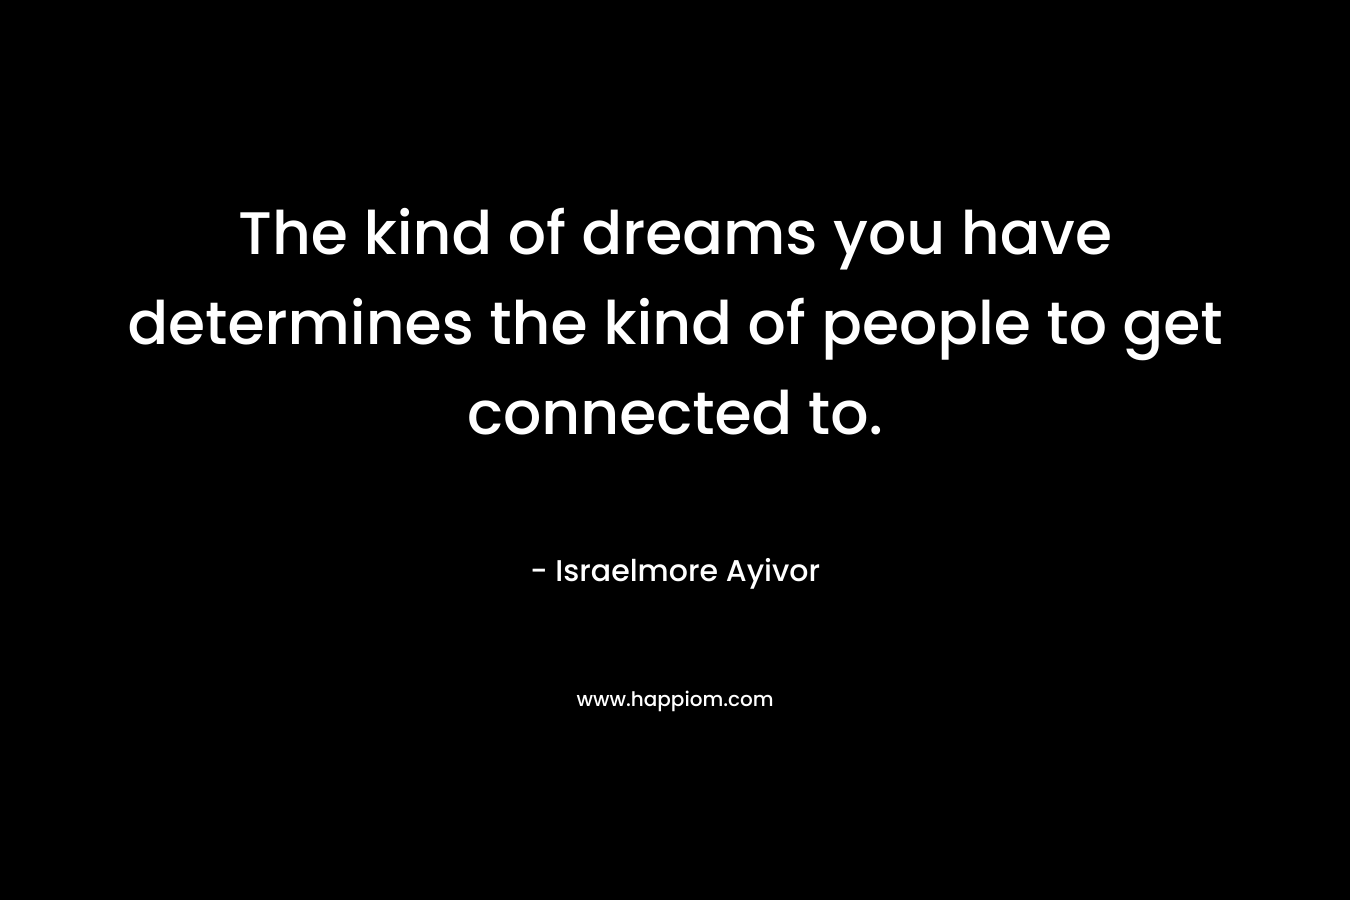 The kind of dreams you have determines the kind of people to get connected to.